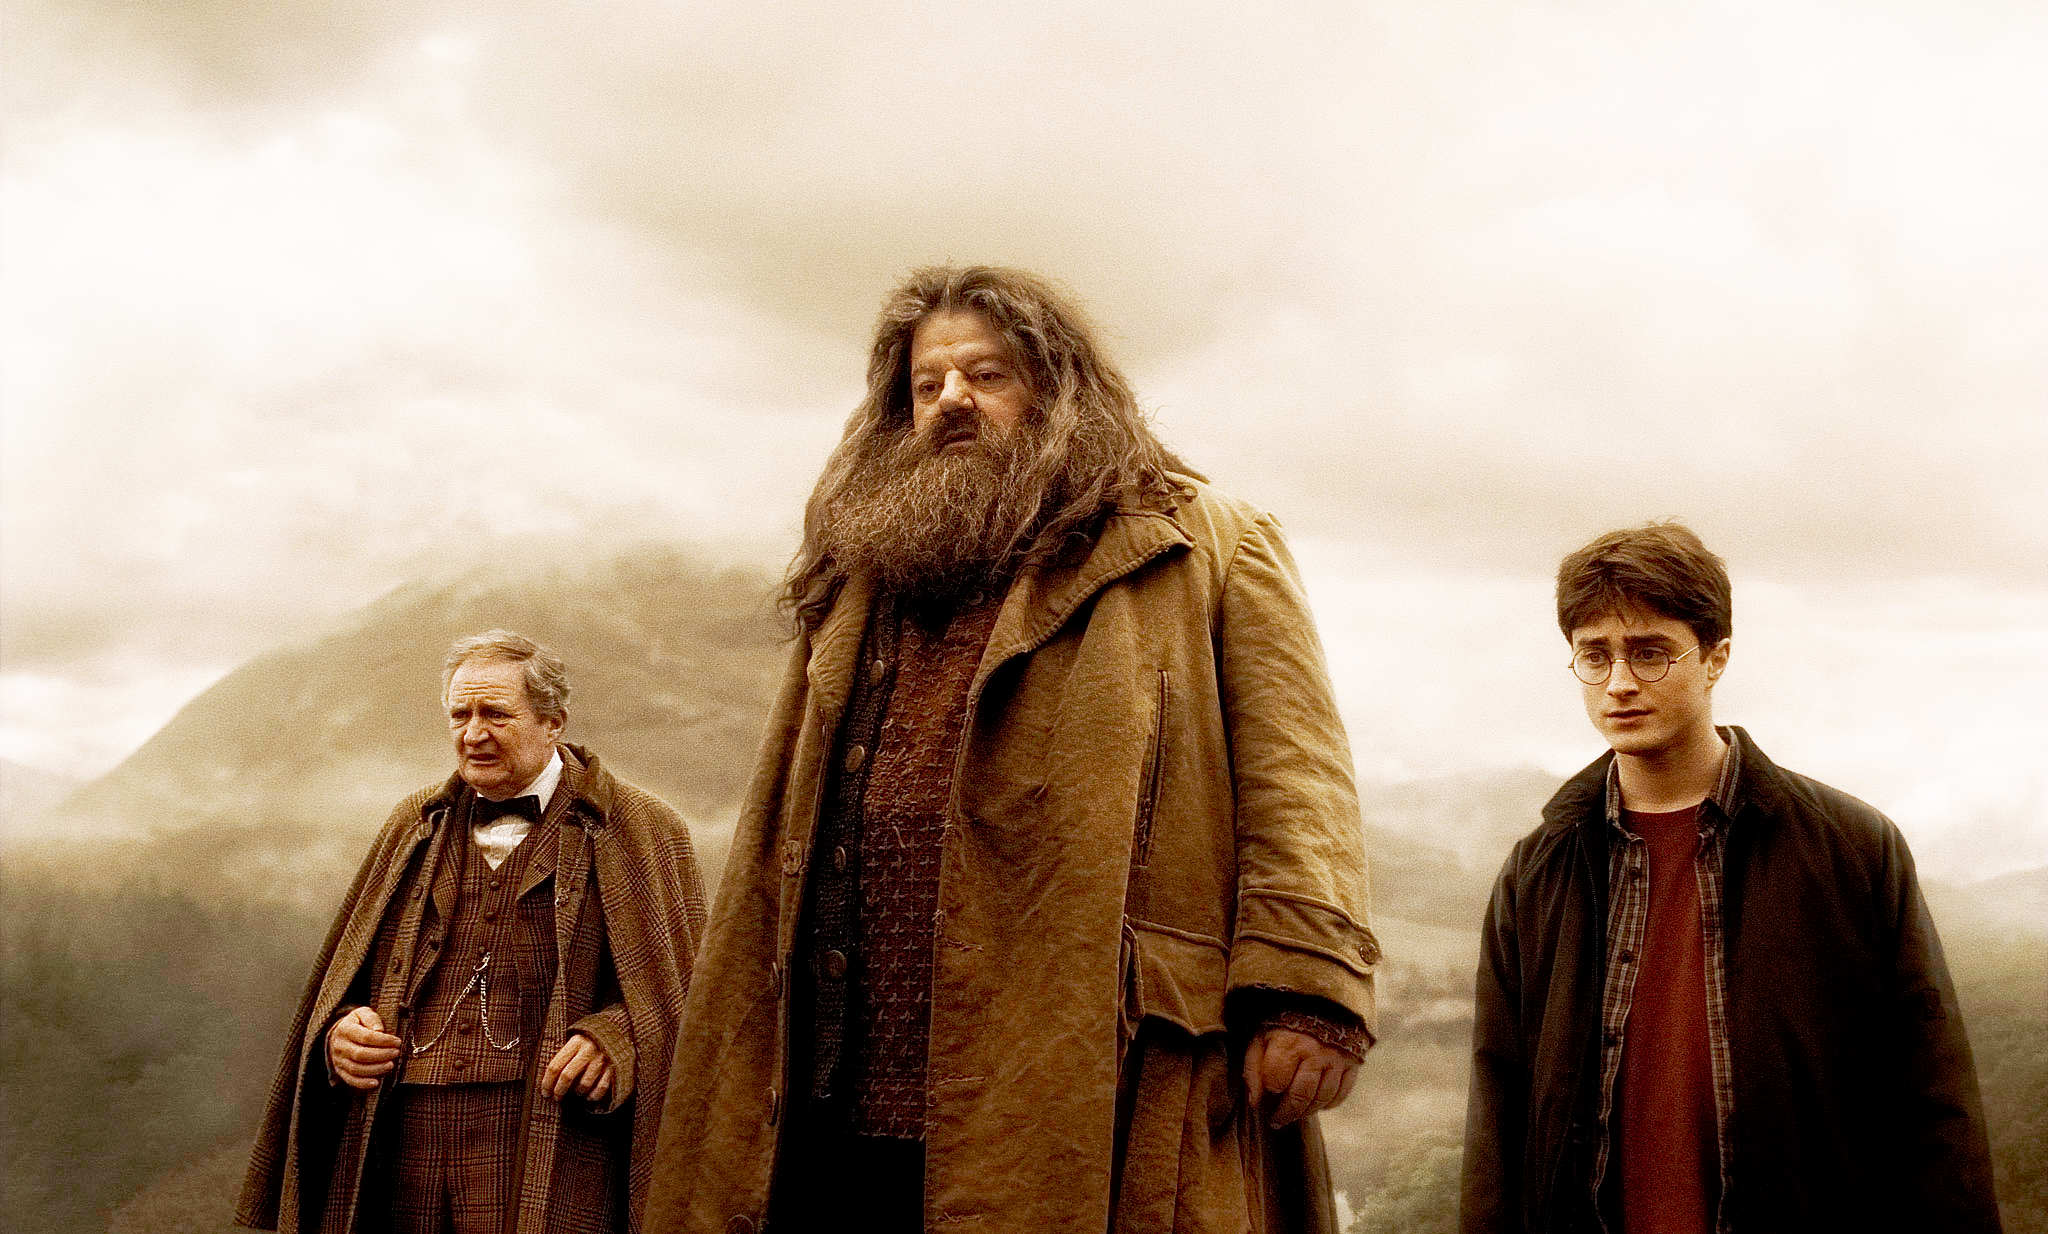 Jim Broadbent, Robbie Coltrane and Daniel Radcliffe in Warner Bros' Harry Potter and the Half-Blood Prince (2009)